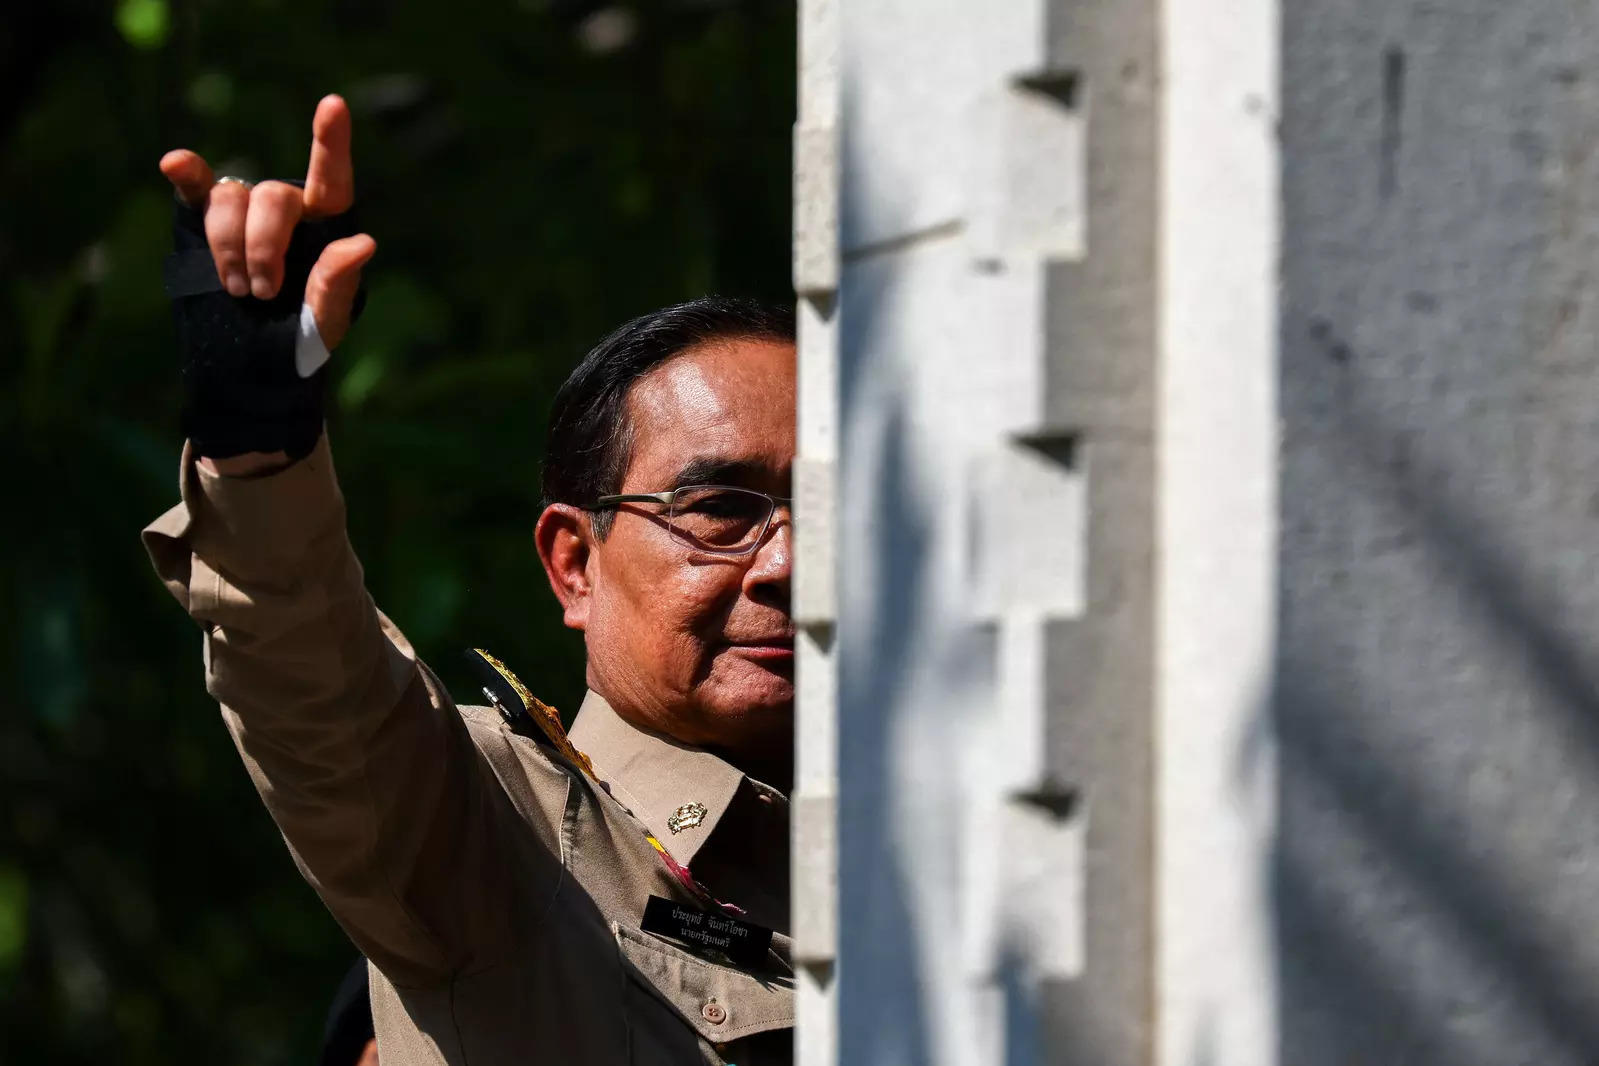 Thailand’s Prime Minister Prayuth Chan-ocha gestures, after Thailand's King Maha Vajiralongkorn has endorsed a decree to dissolve parliament, at the Government House in Bangkok 